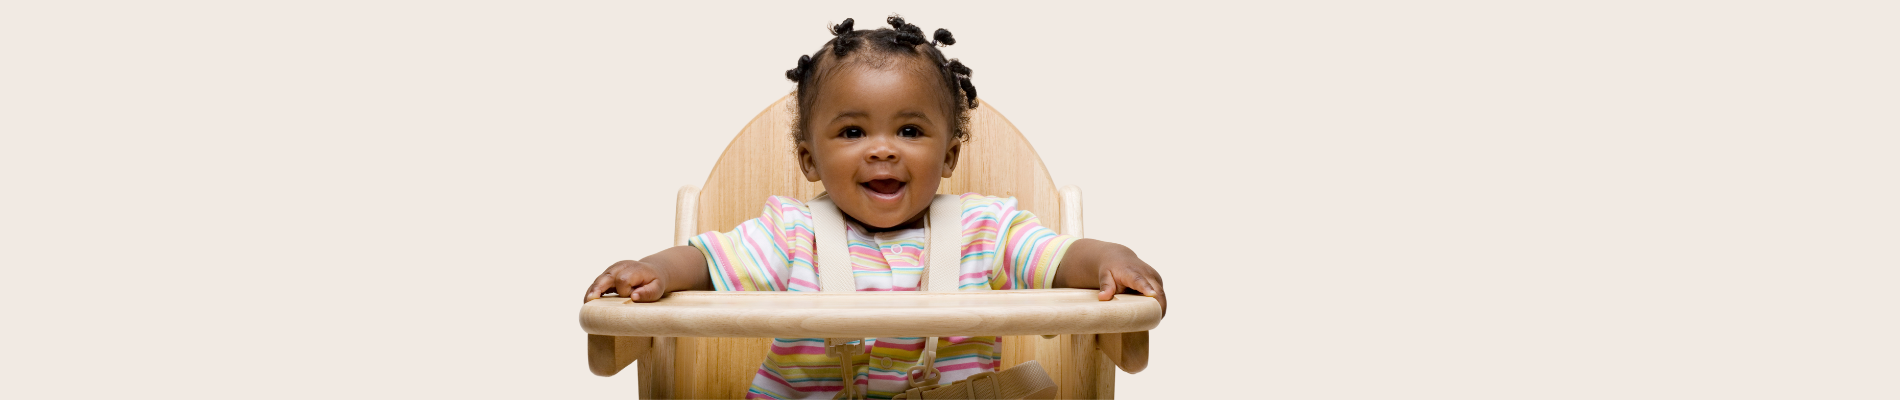 smiling baby in highchair